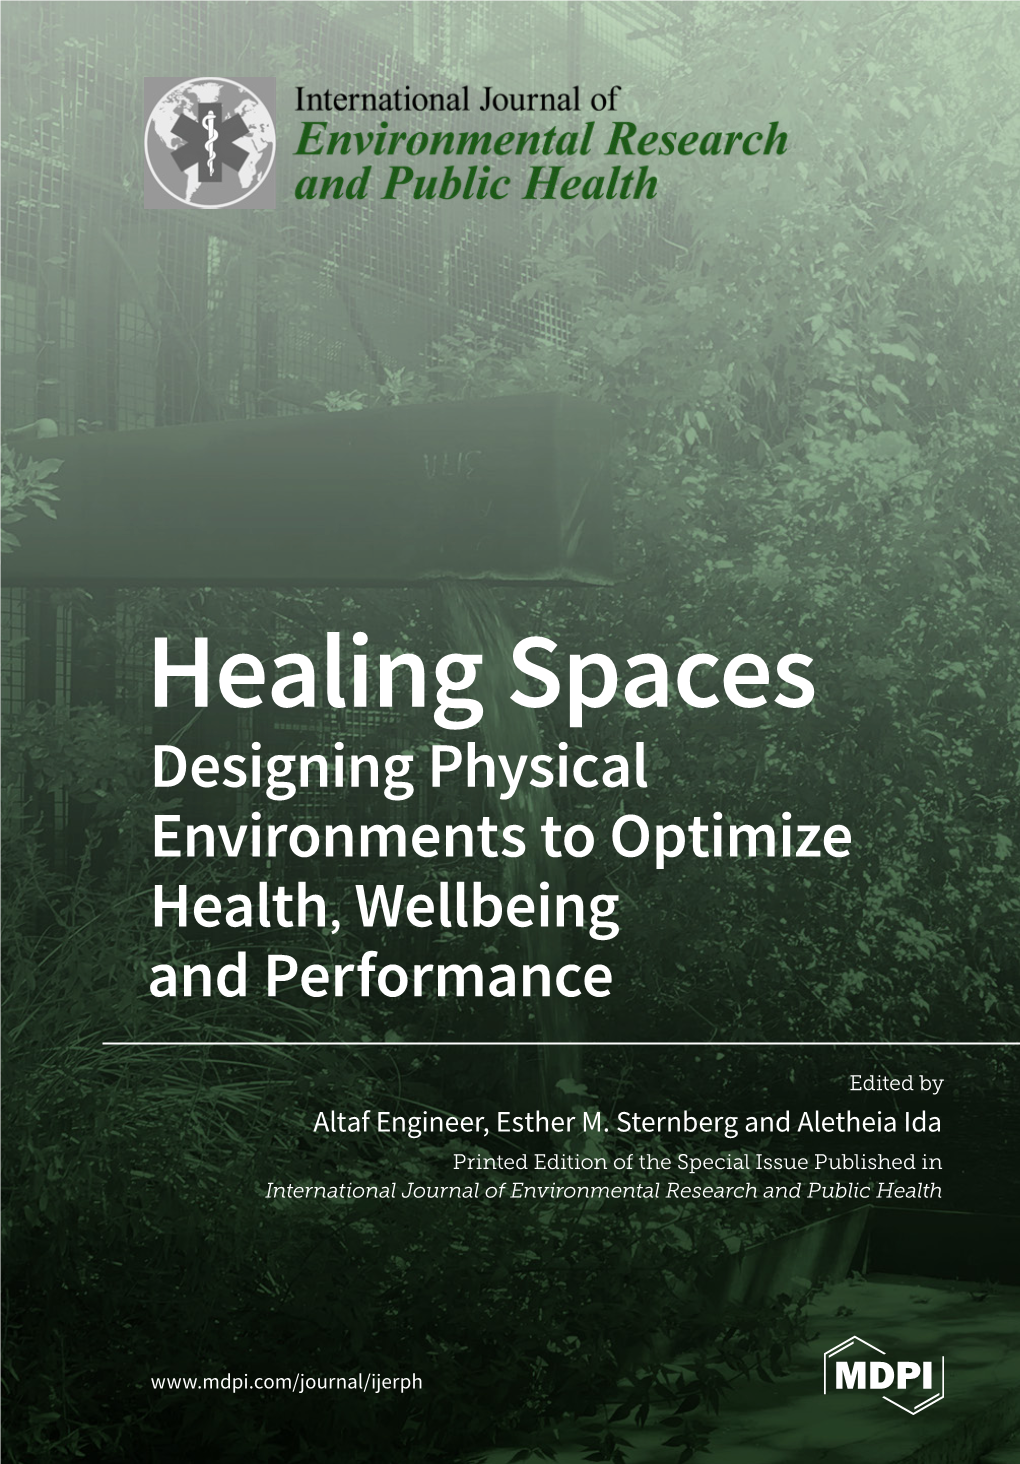 Healing Spaces Designing Physical Environments to Optimize Health, Wellbeing and Performance